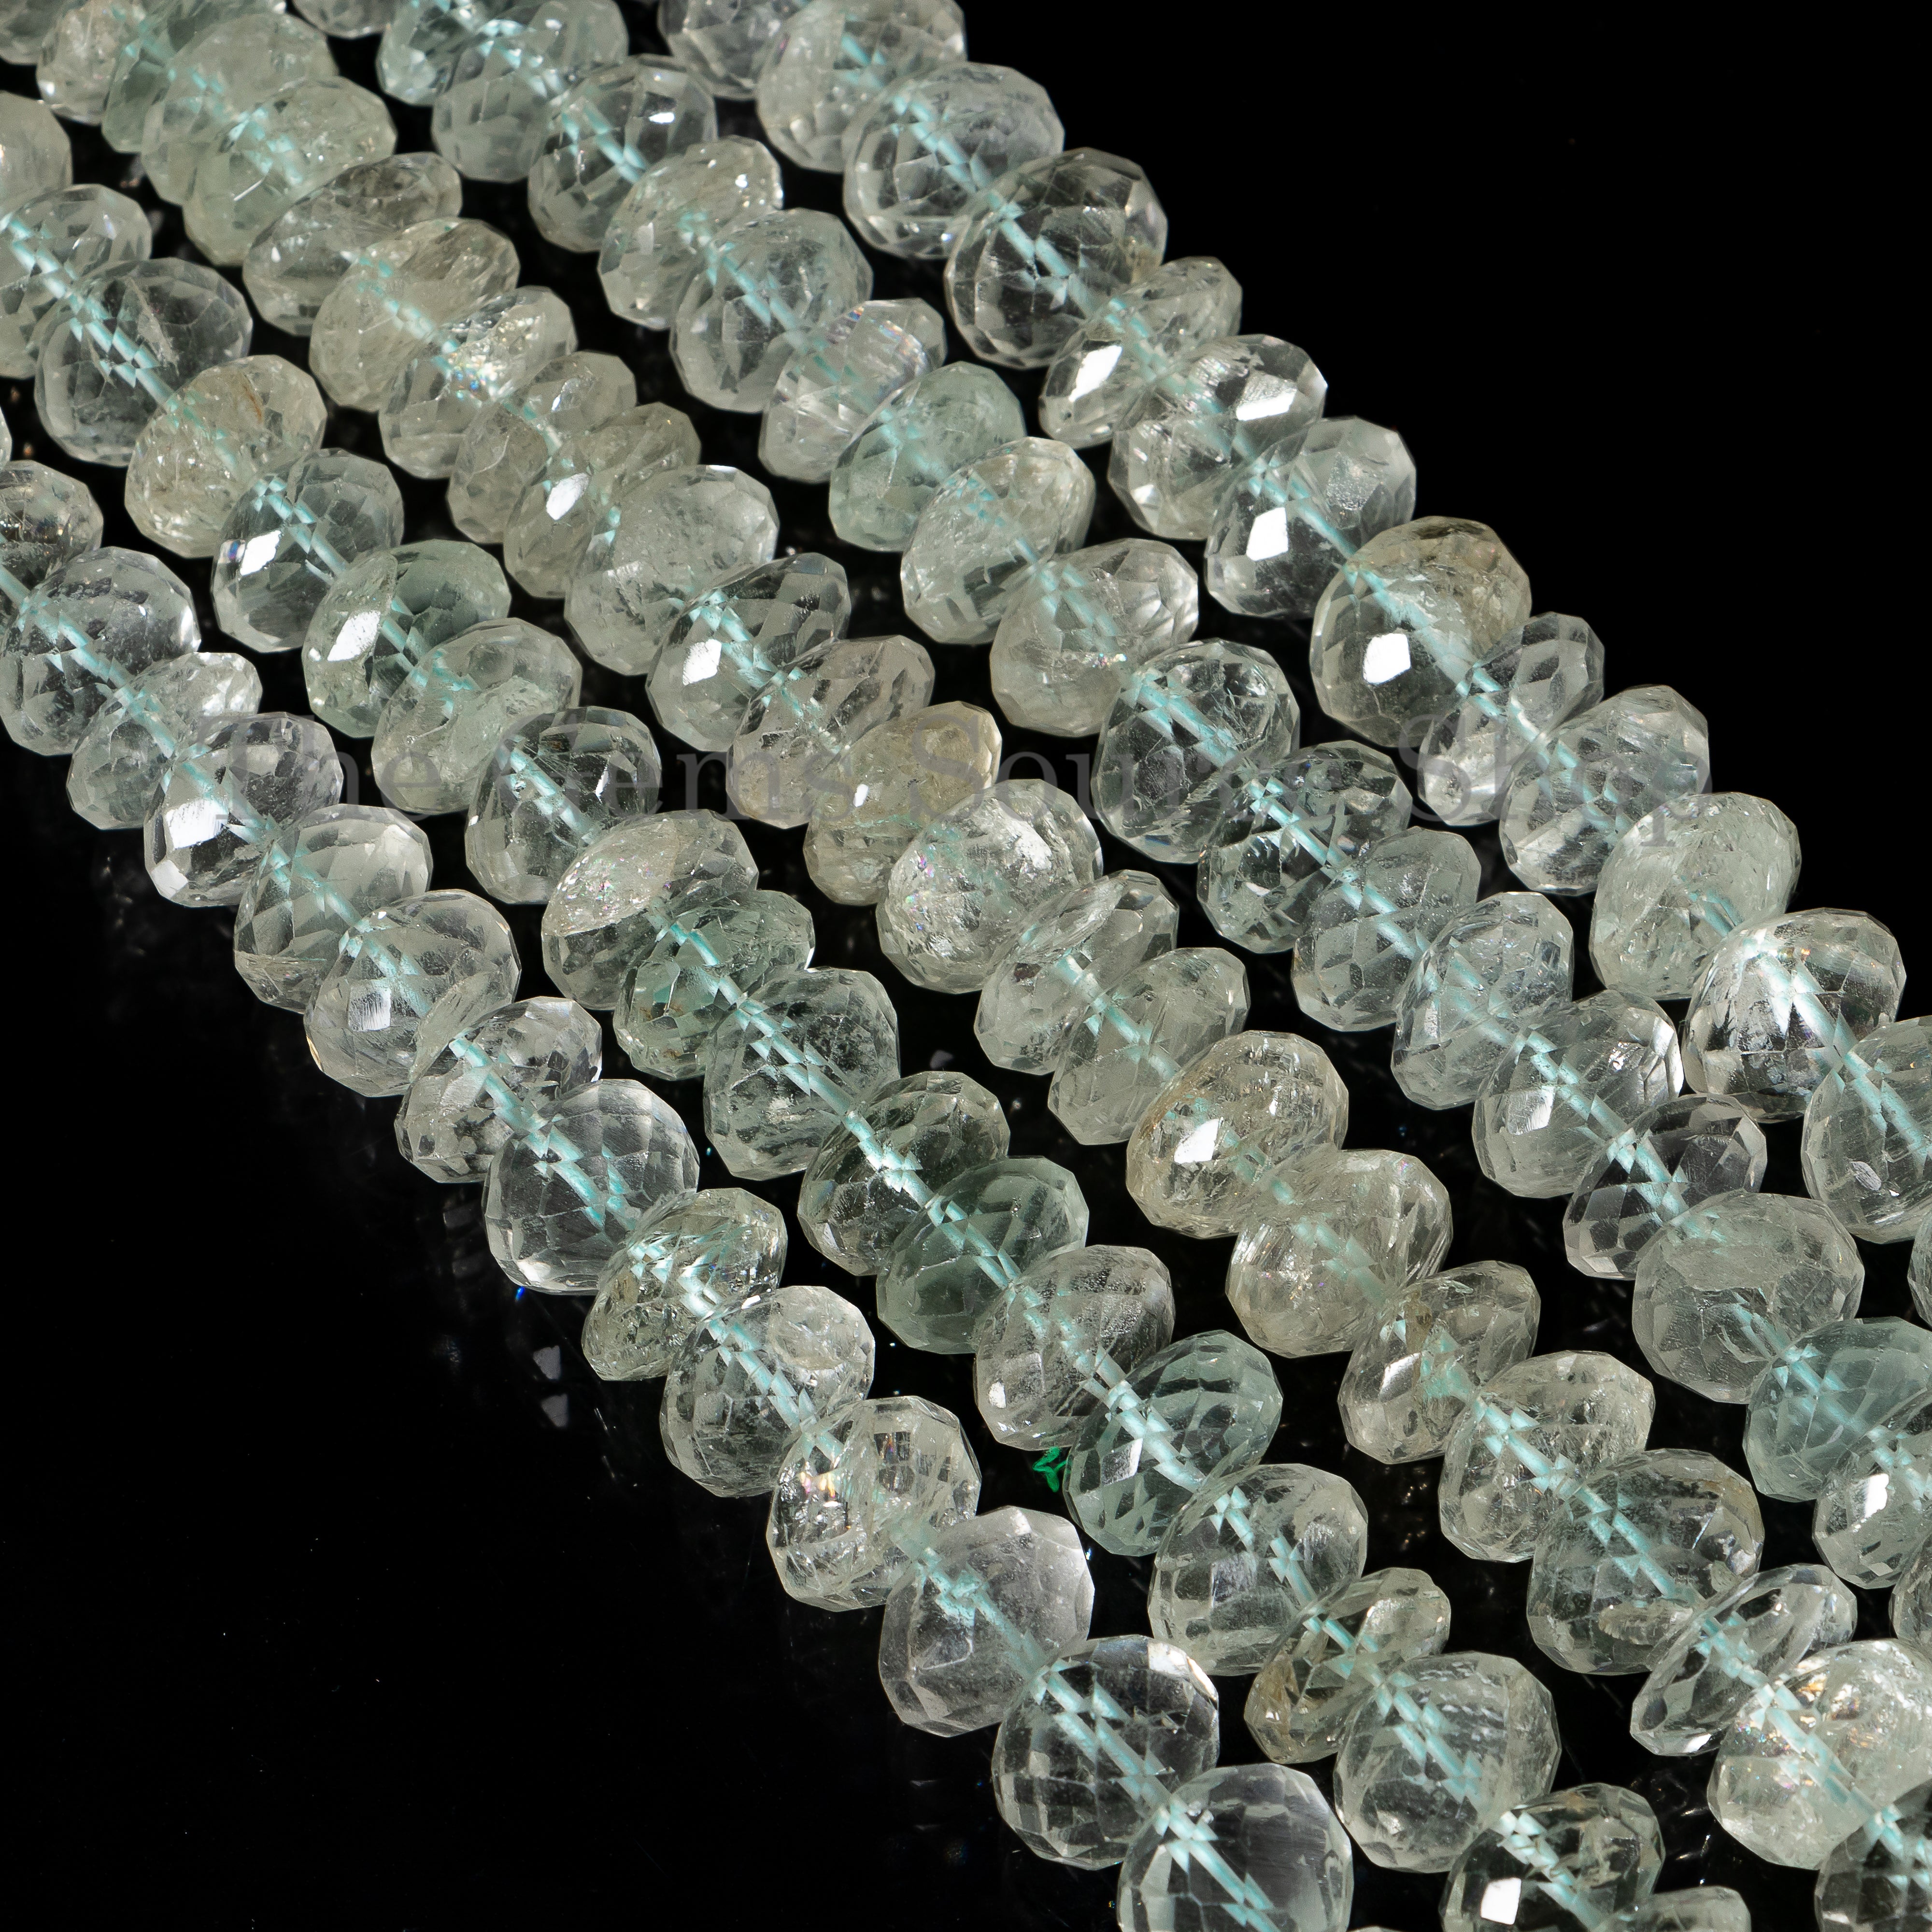 Aquamarine Faceted Rondelle Beads, Natural Aquamarine Gemstone Loose Beads for Jewelry Making.TGS-5141